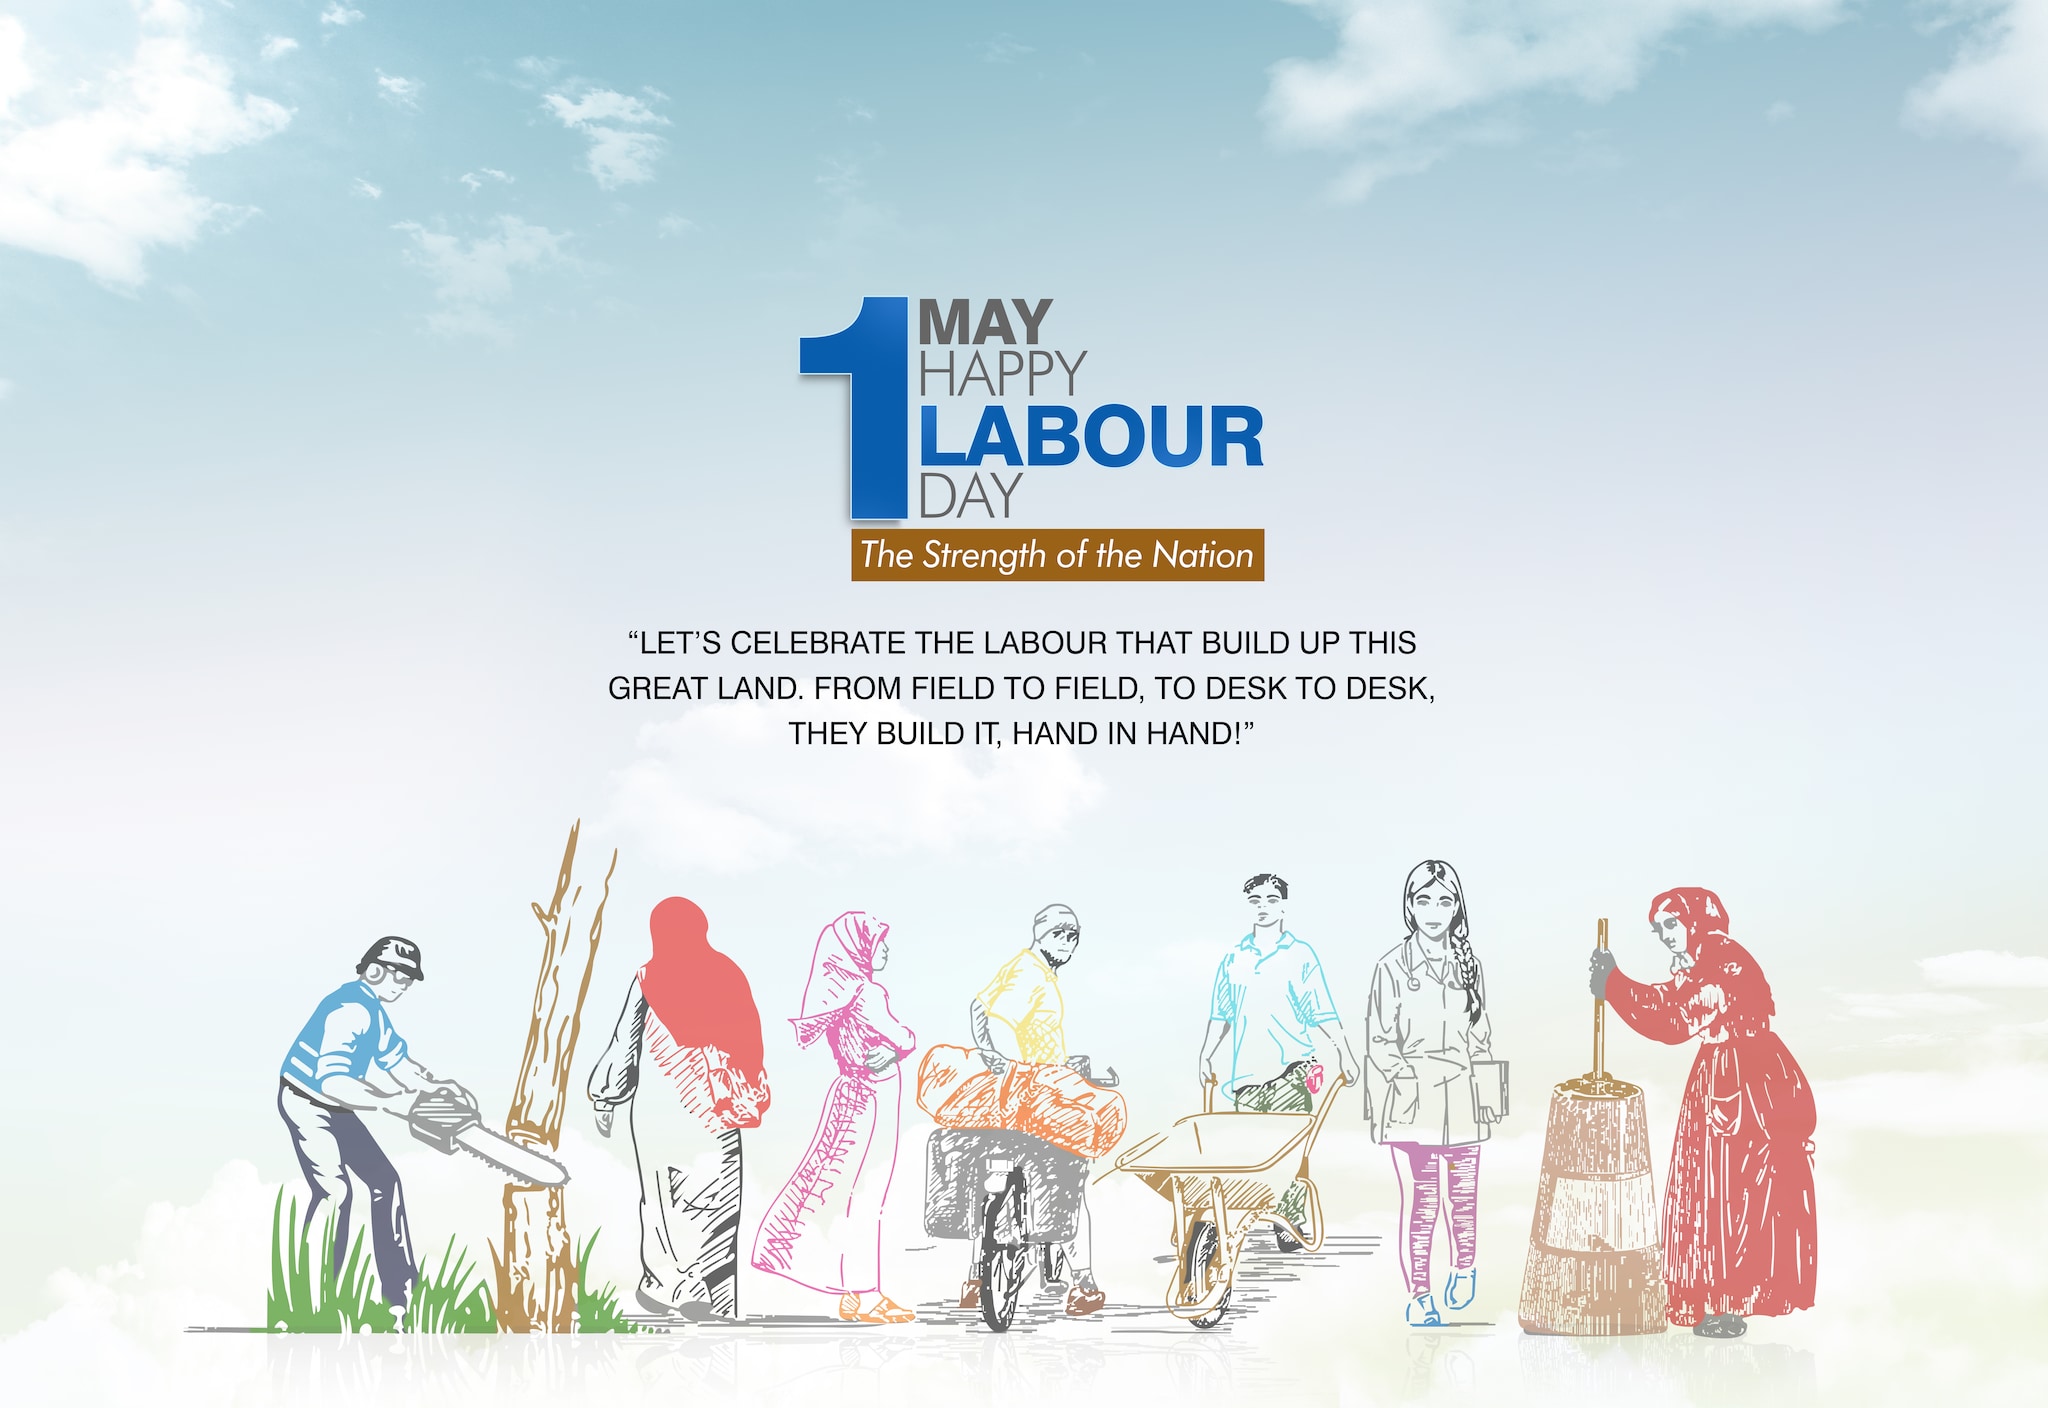 Happy International Labour Day 2022 Wishes, Images, Status, Quotes